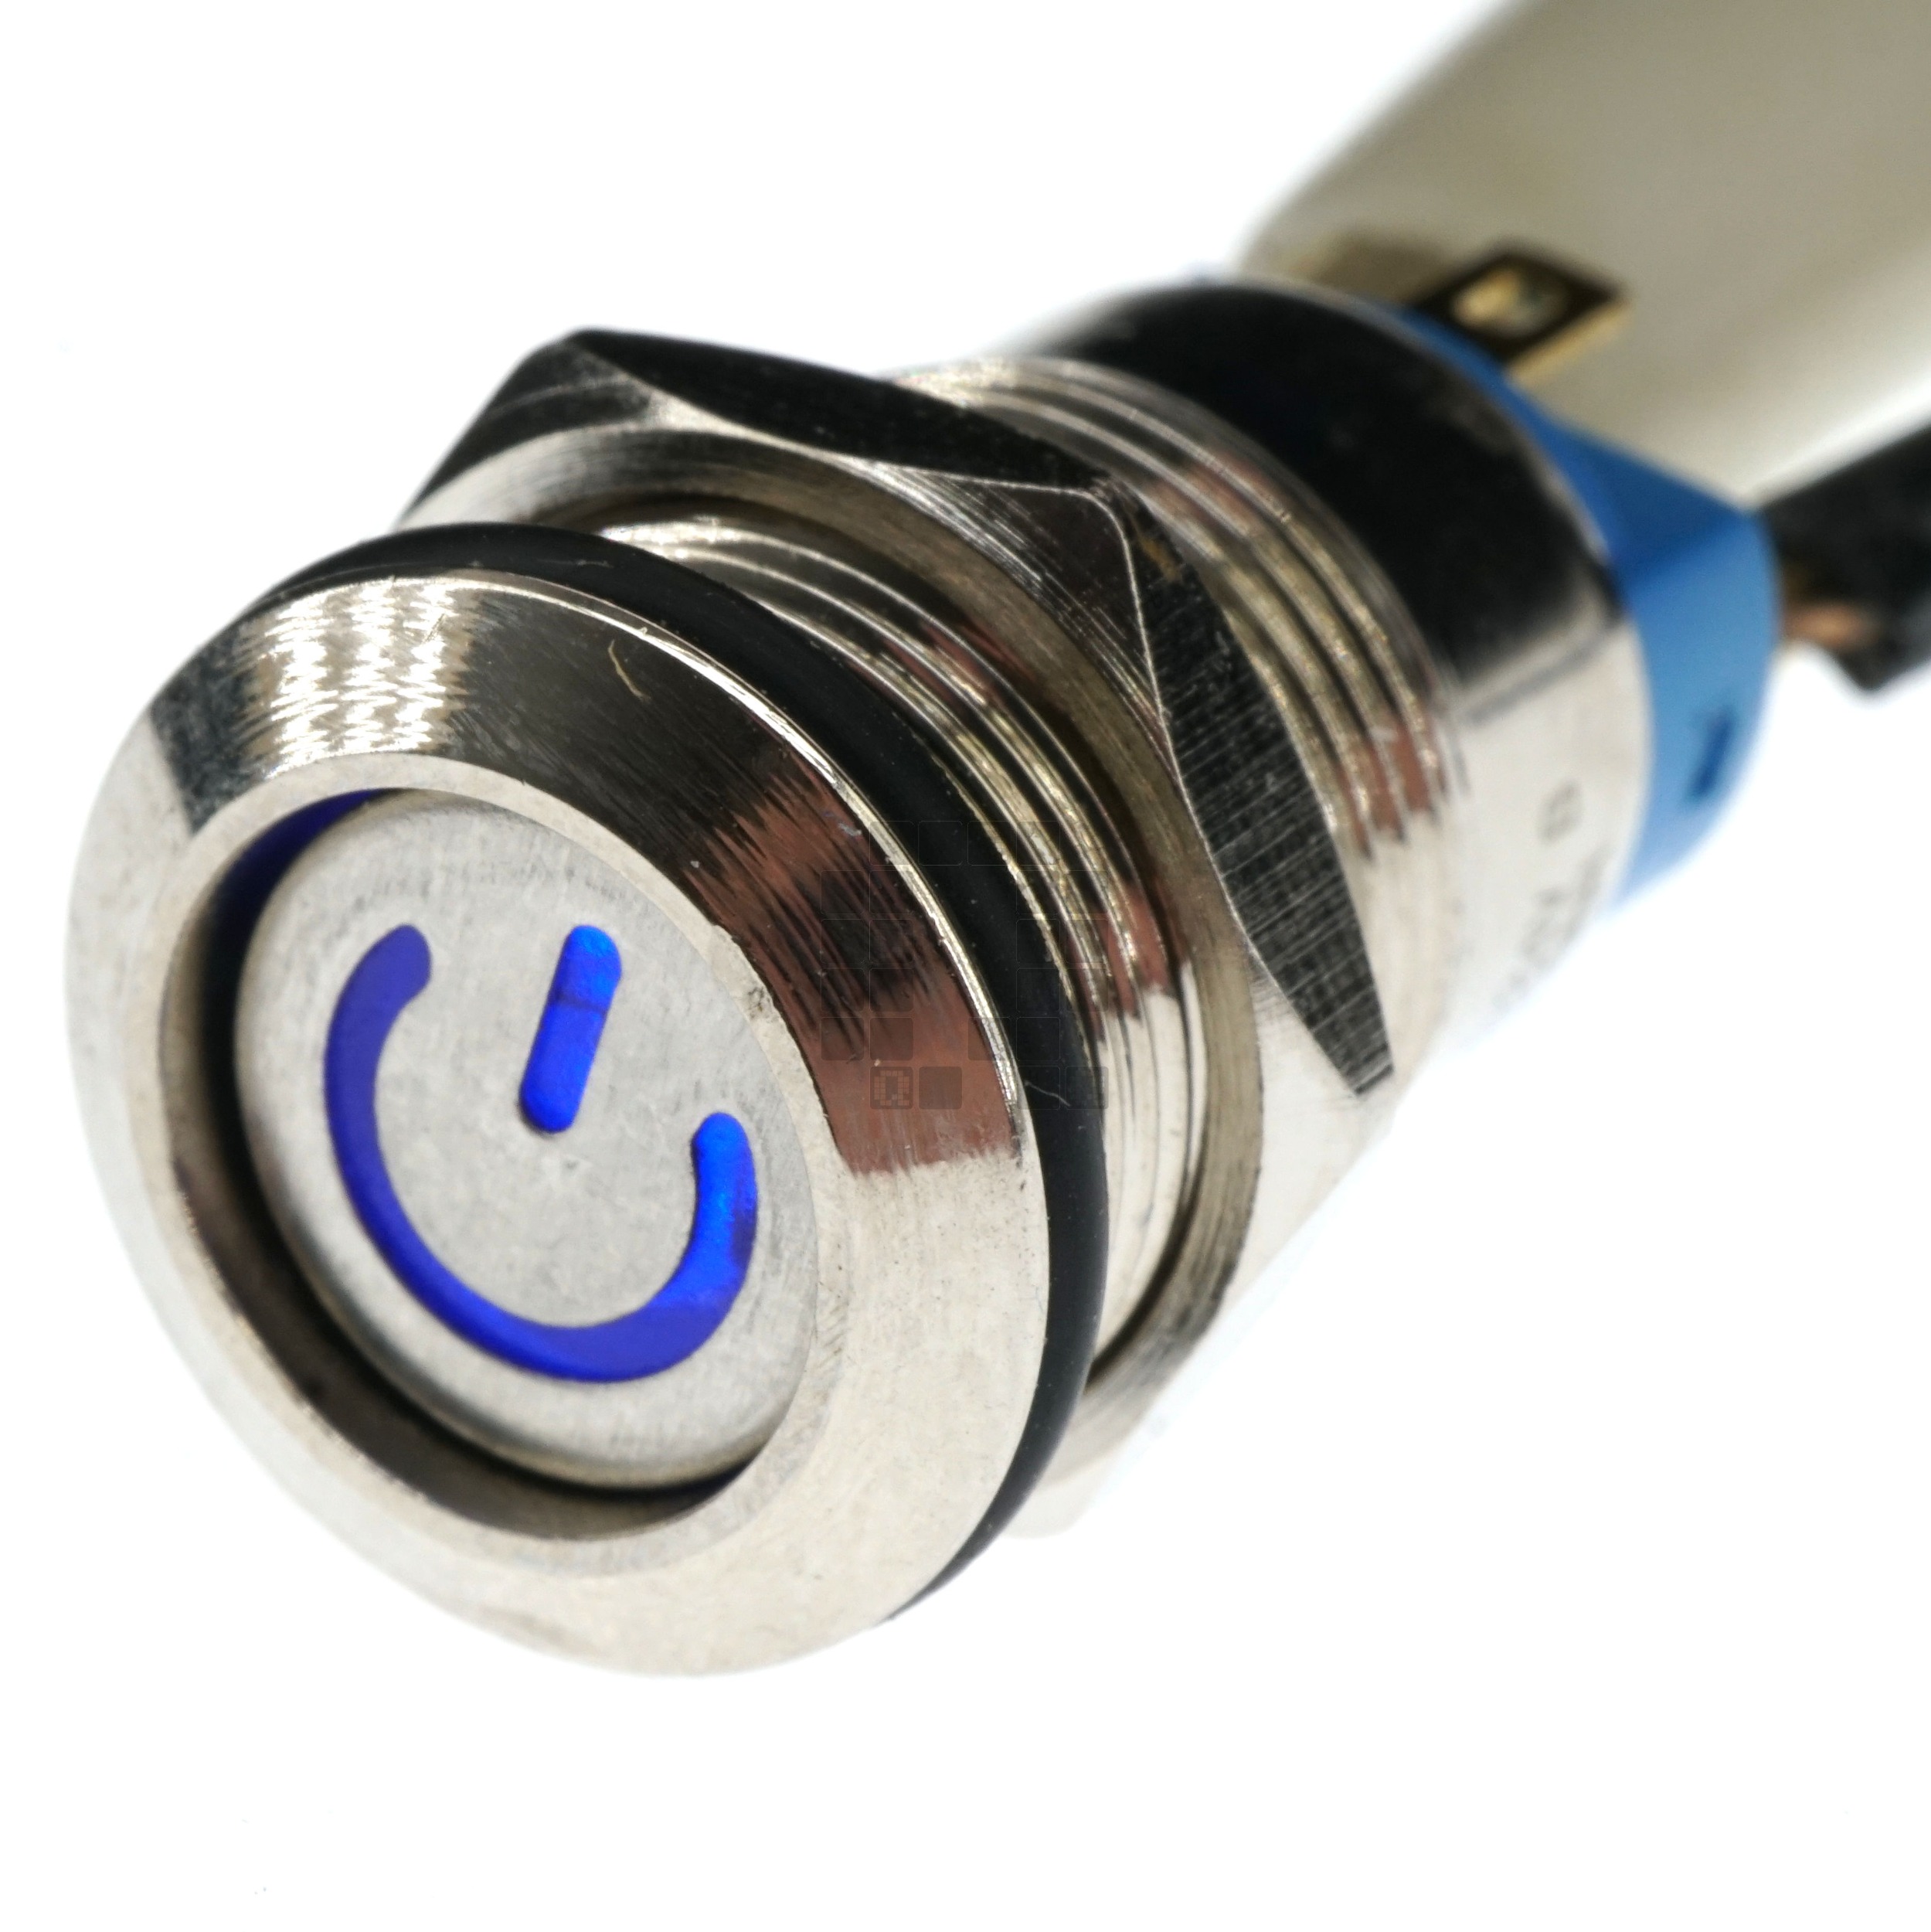 12mm Threaded Metal Pushbutton, Maintained/Locking, Blue LED, 12-24VDC, Lighted Power Symbol, IP65, SPST